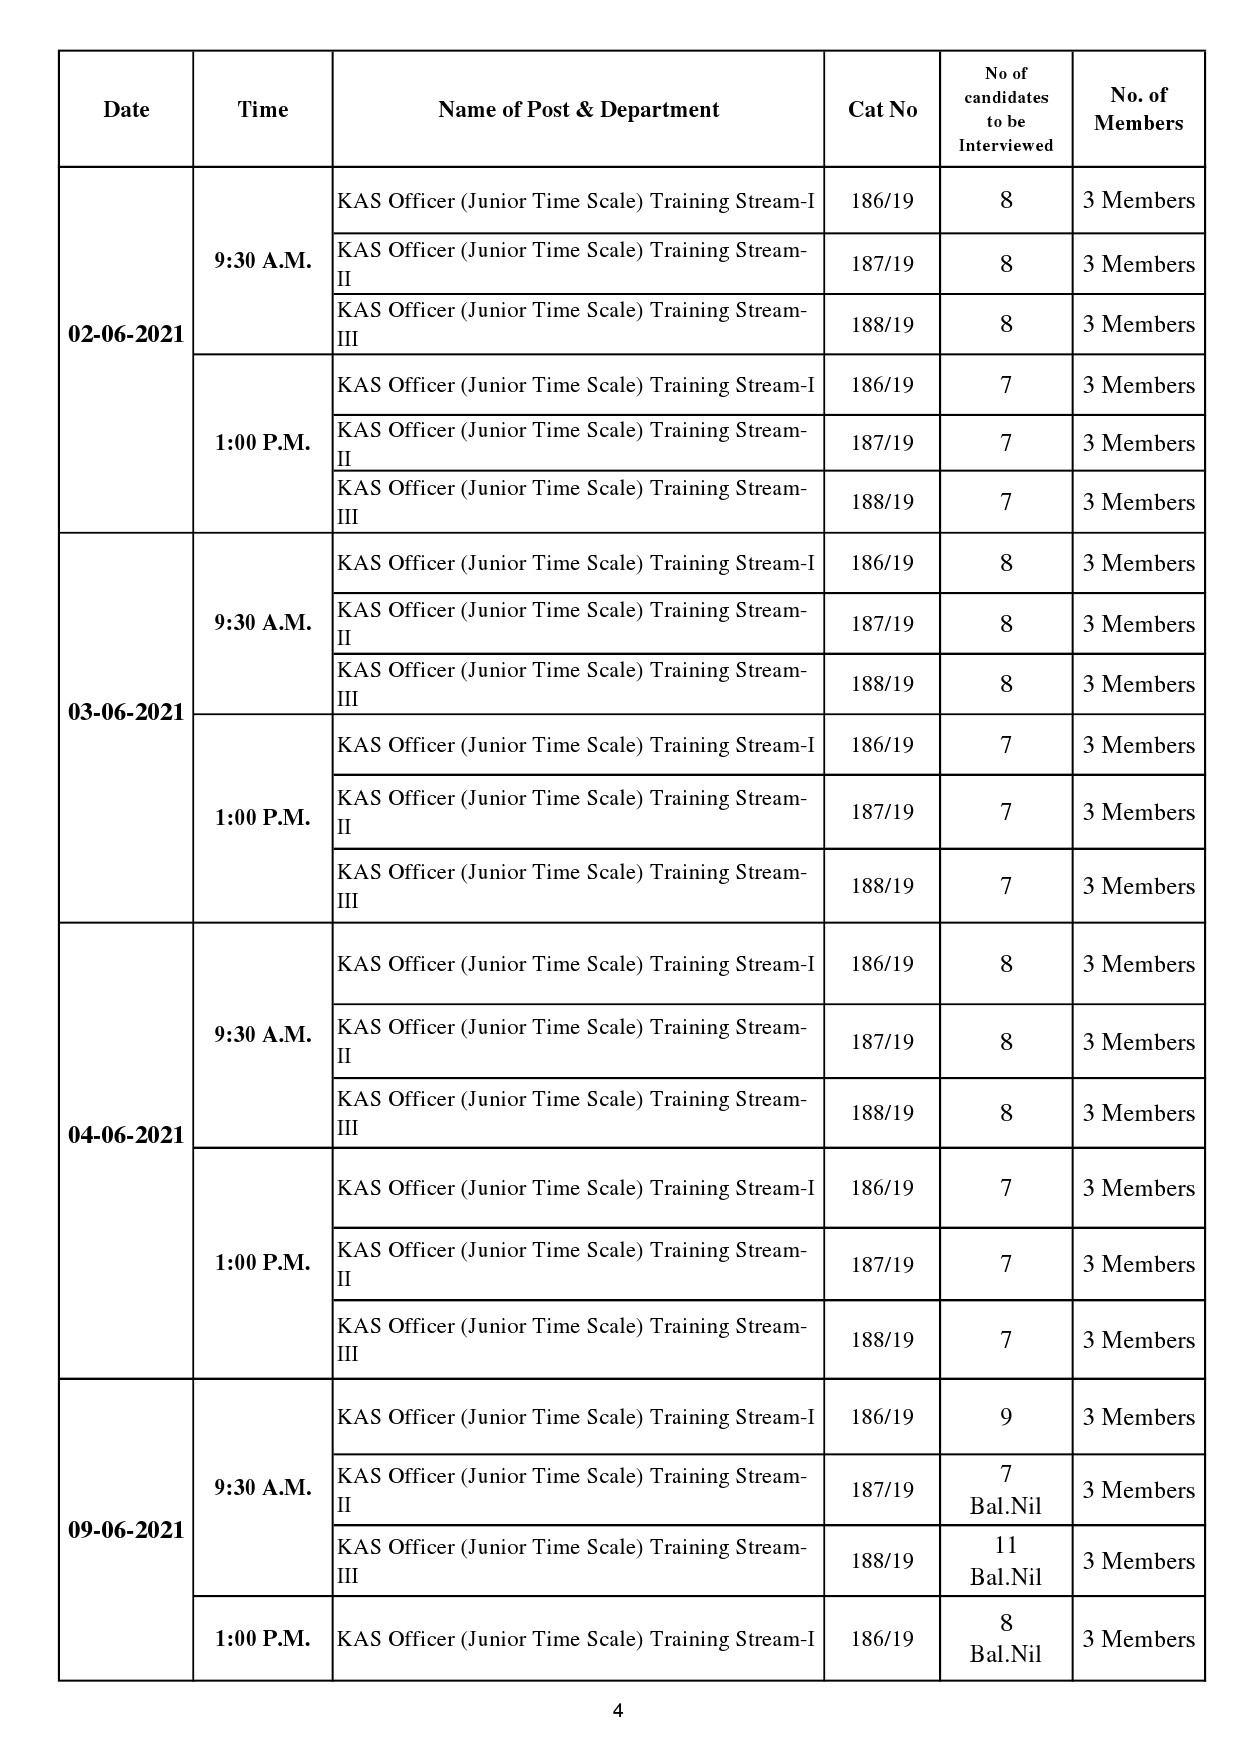 INTERVIEW PROGRAMME FOR THE MONTH OF MAY JUNE 2021 - Notification Image 4